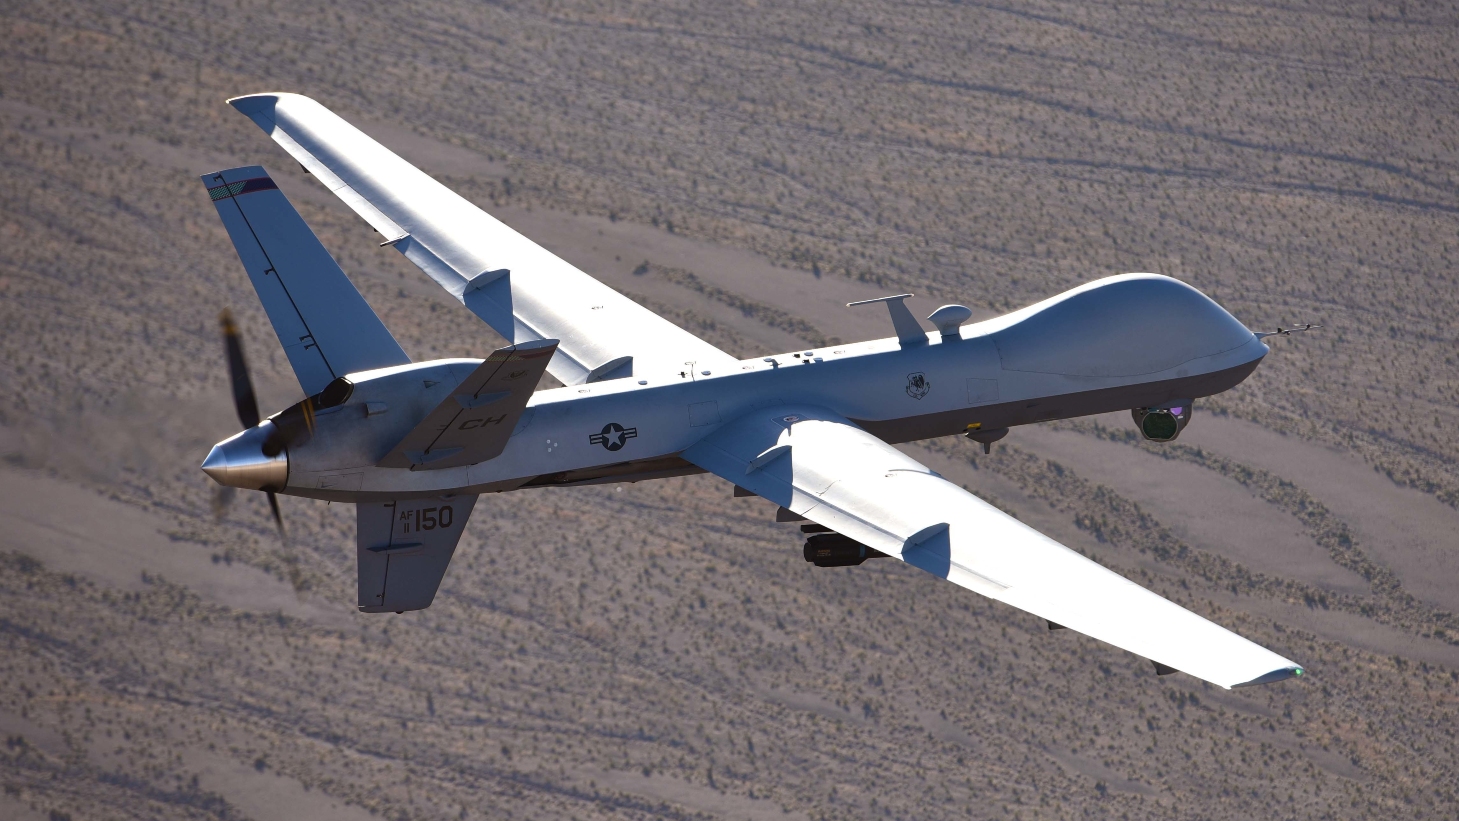 The U.S. MQ-9 drone is employed primarily as an intelligence-collection asset and can also perform precision strikes according to the U.S. airforce./U.S. Air Force